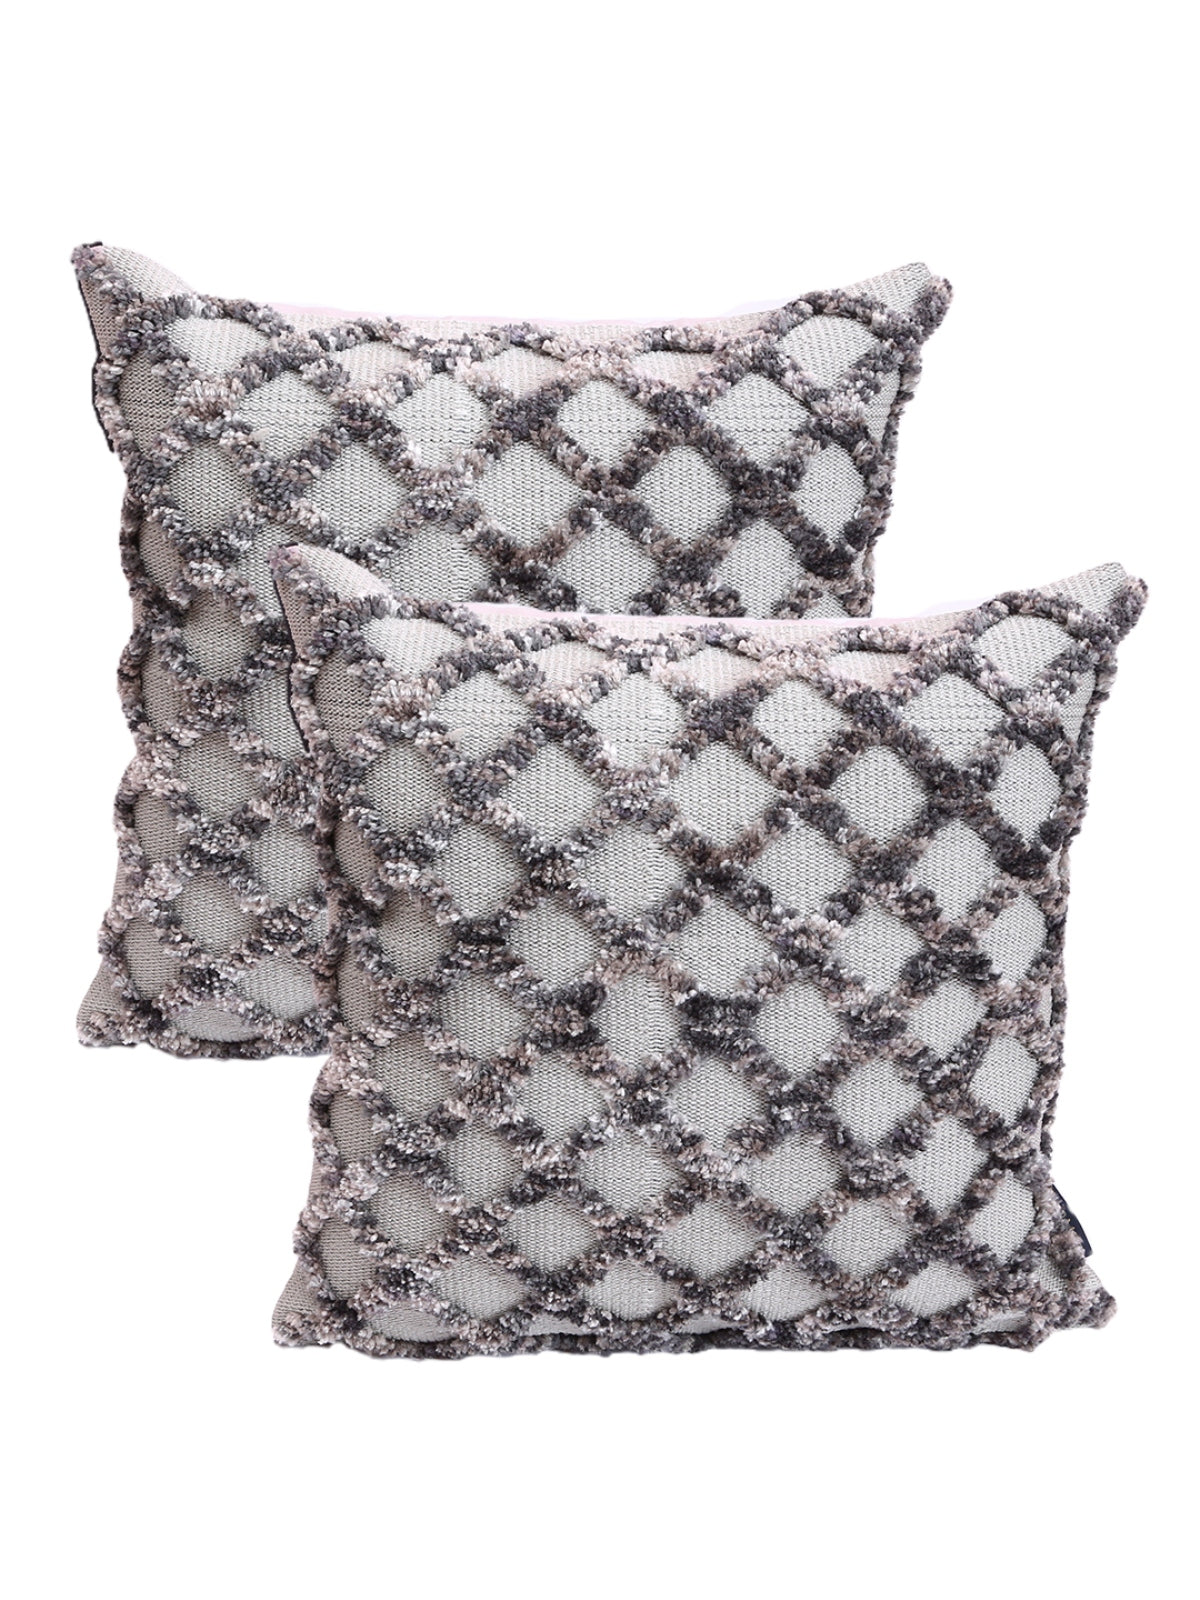 Silver Set of 2 Wool Tufted 18 Inch x 18 Inch Cushion Covers